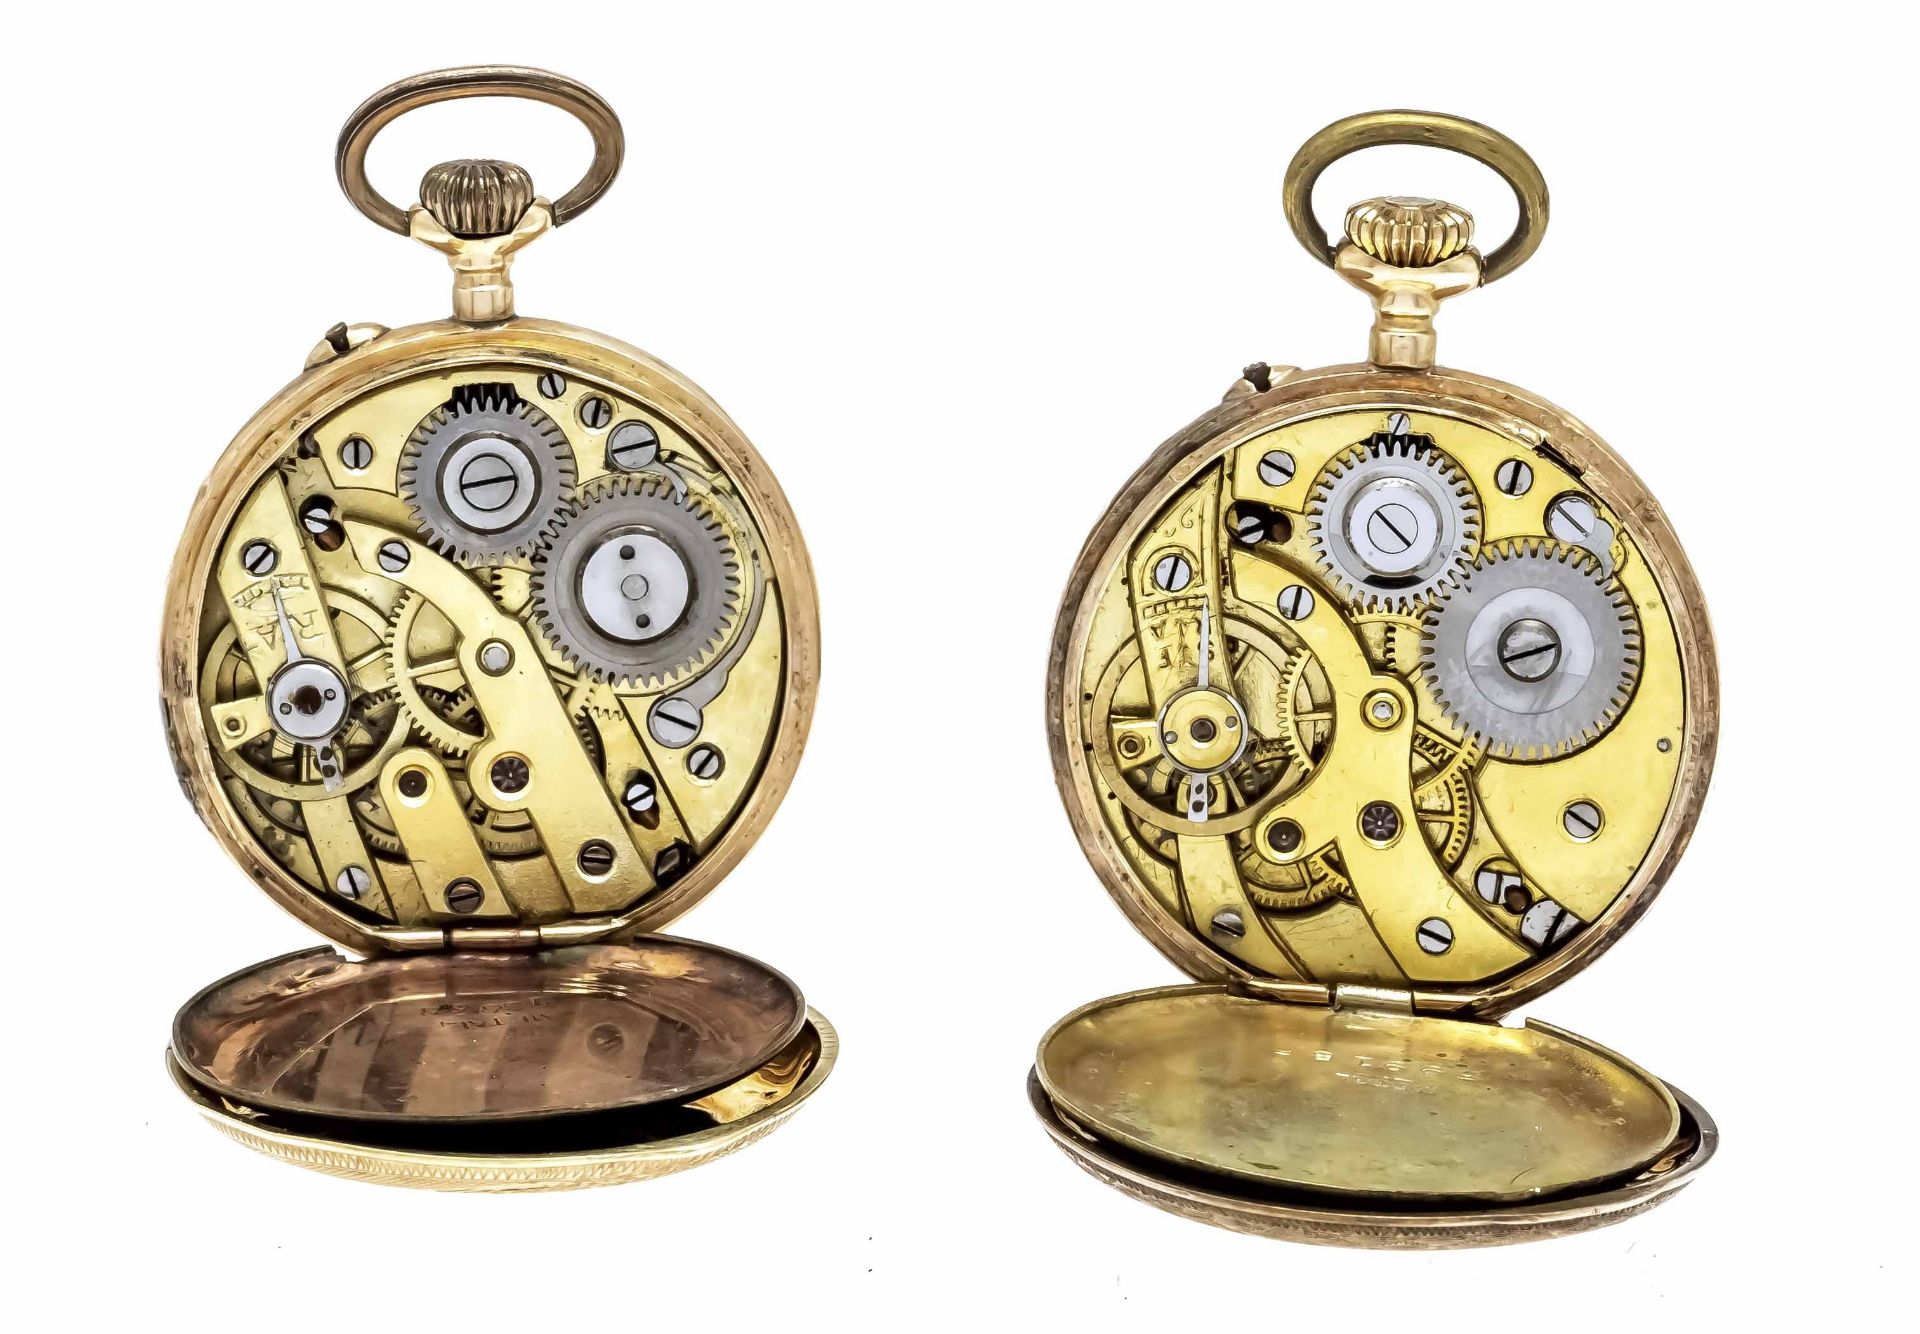 2 ladies' watches each 1 cover 585/000 GG, one with floral enamel motif, cylinder movements start, - Image 2 of 3